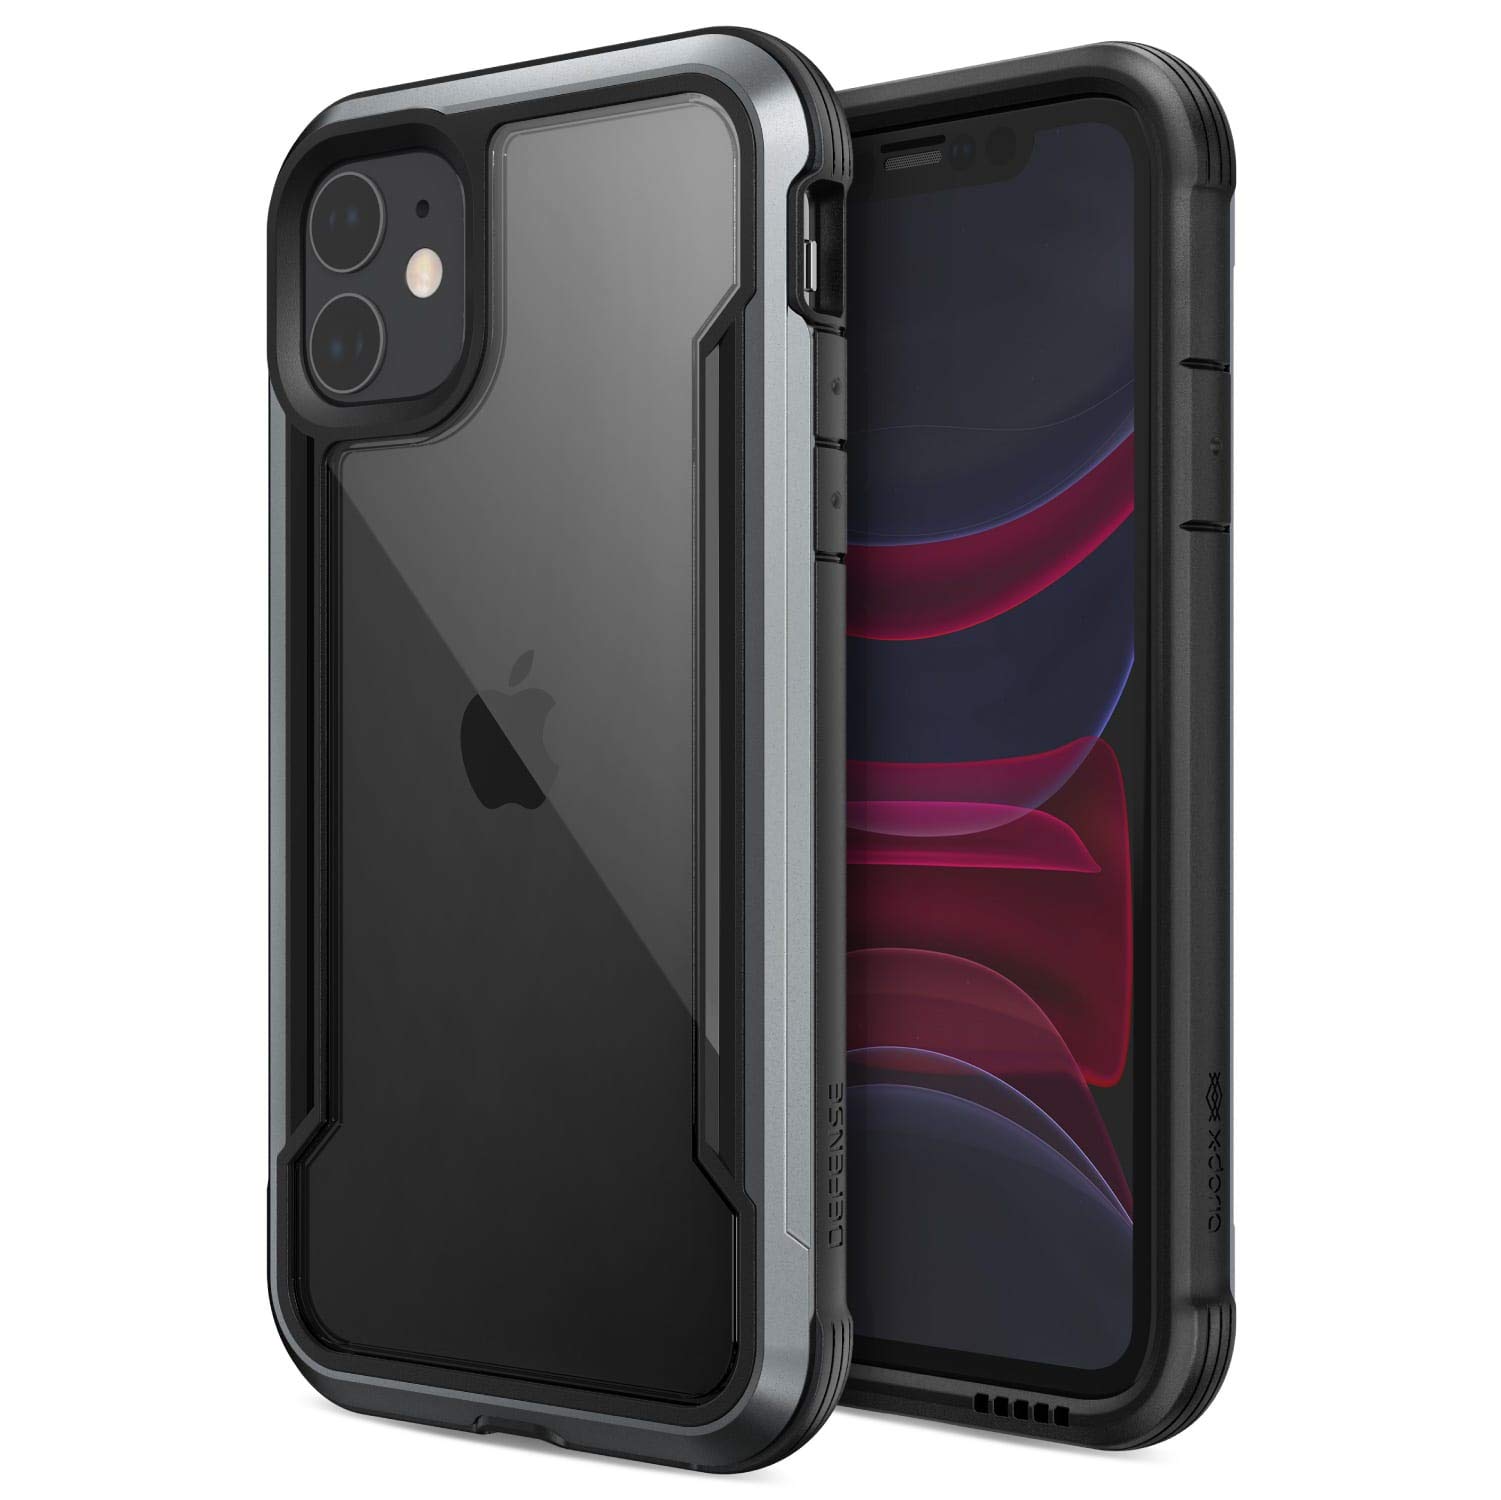 X-Doria Raptic Shield, iPhone 11 Pro Max Case (Formerly Defense Shield) - Military Grade Drop Tested, Anodized Aluminum, TPU, and Polycarbonate Protective Case for Apple iPhone 11 Pro Max, Black